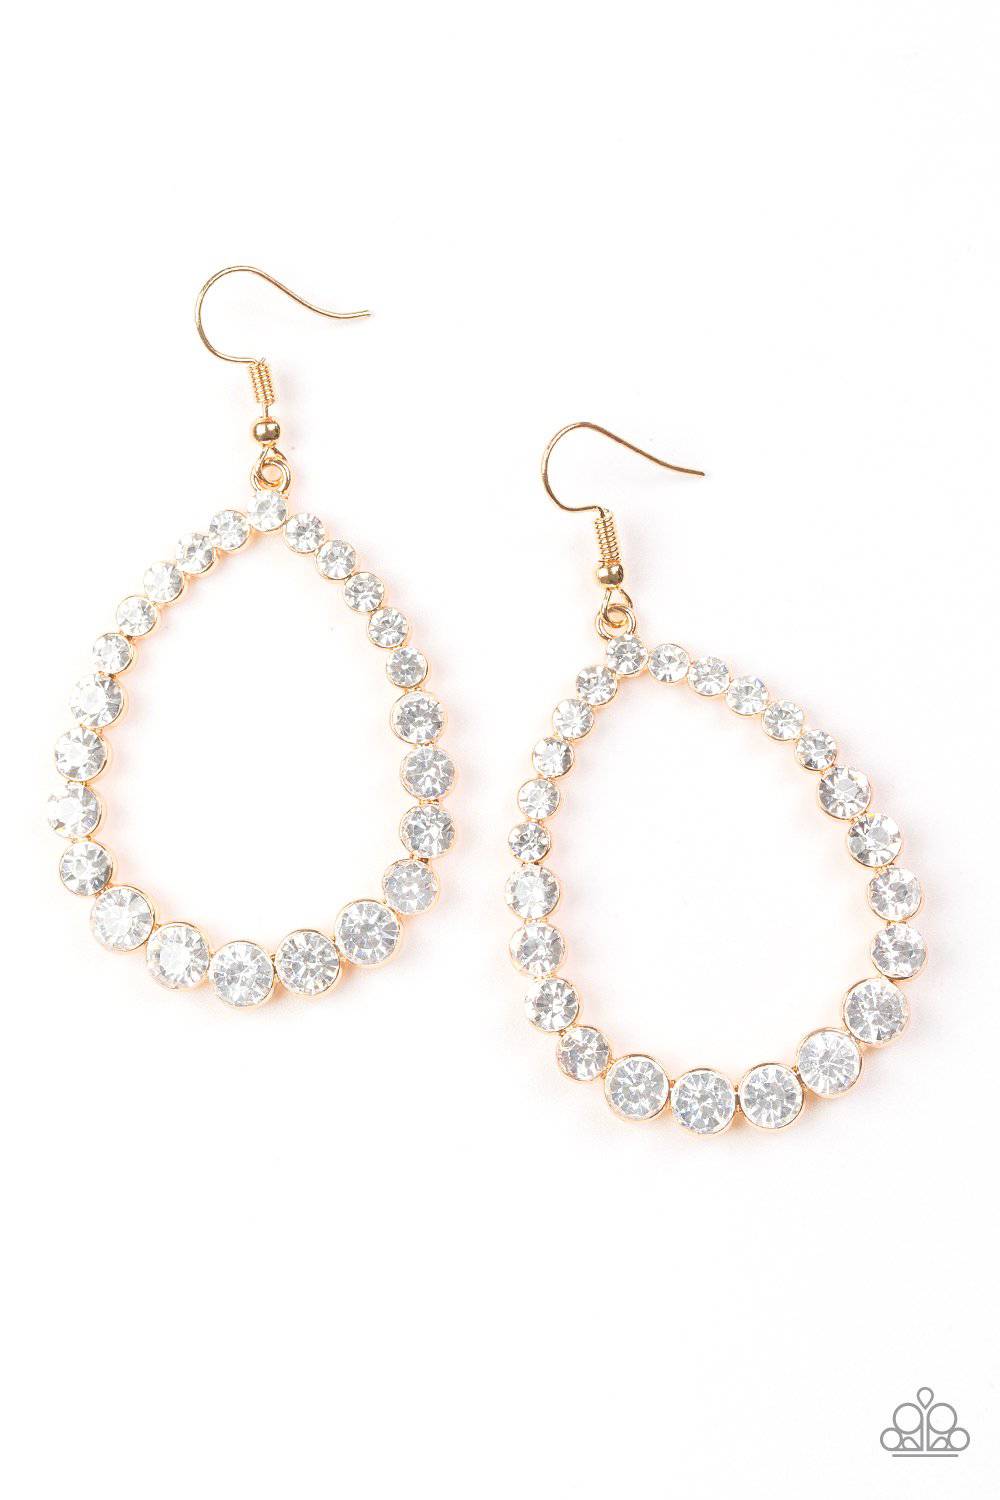 D208  - Rise and Sparkle Gold Earrings by Paparazzi Accessories on Fancy5Fashion.com